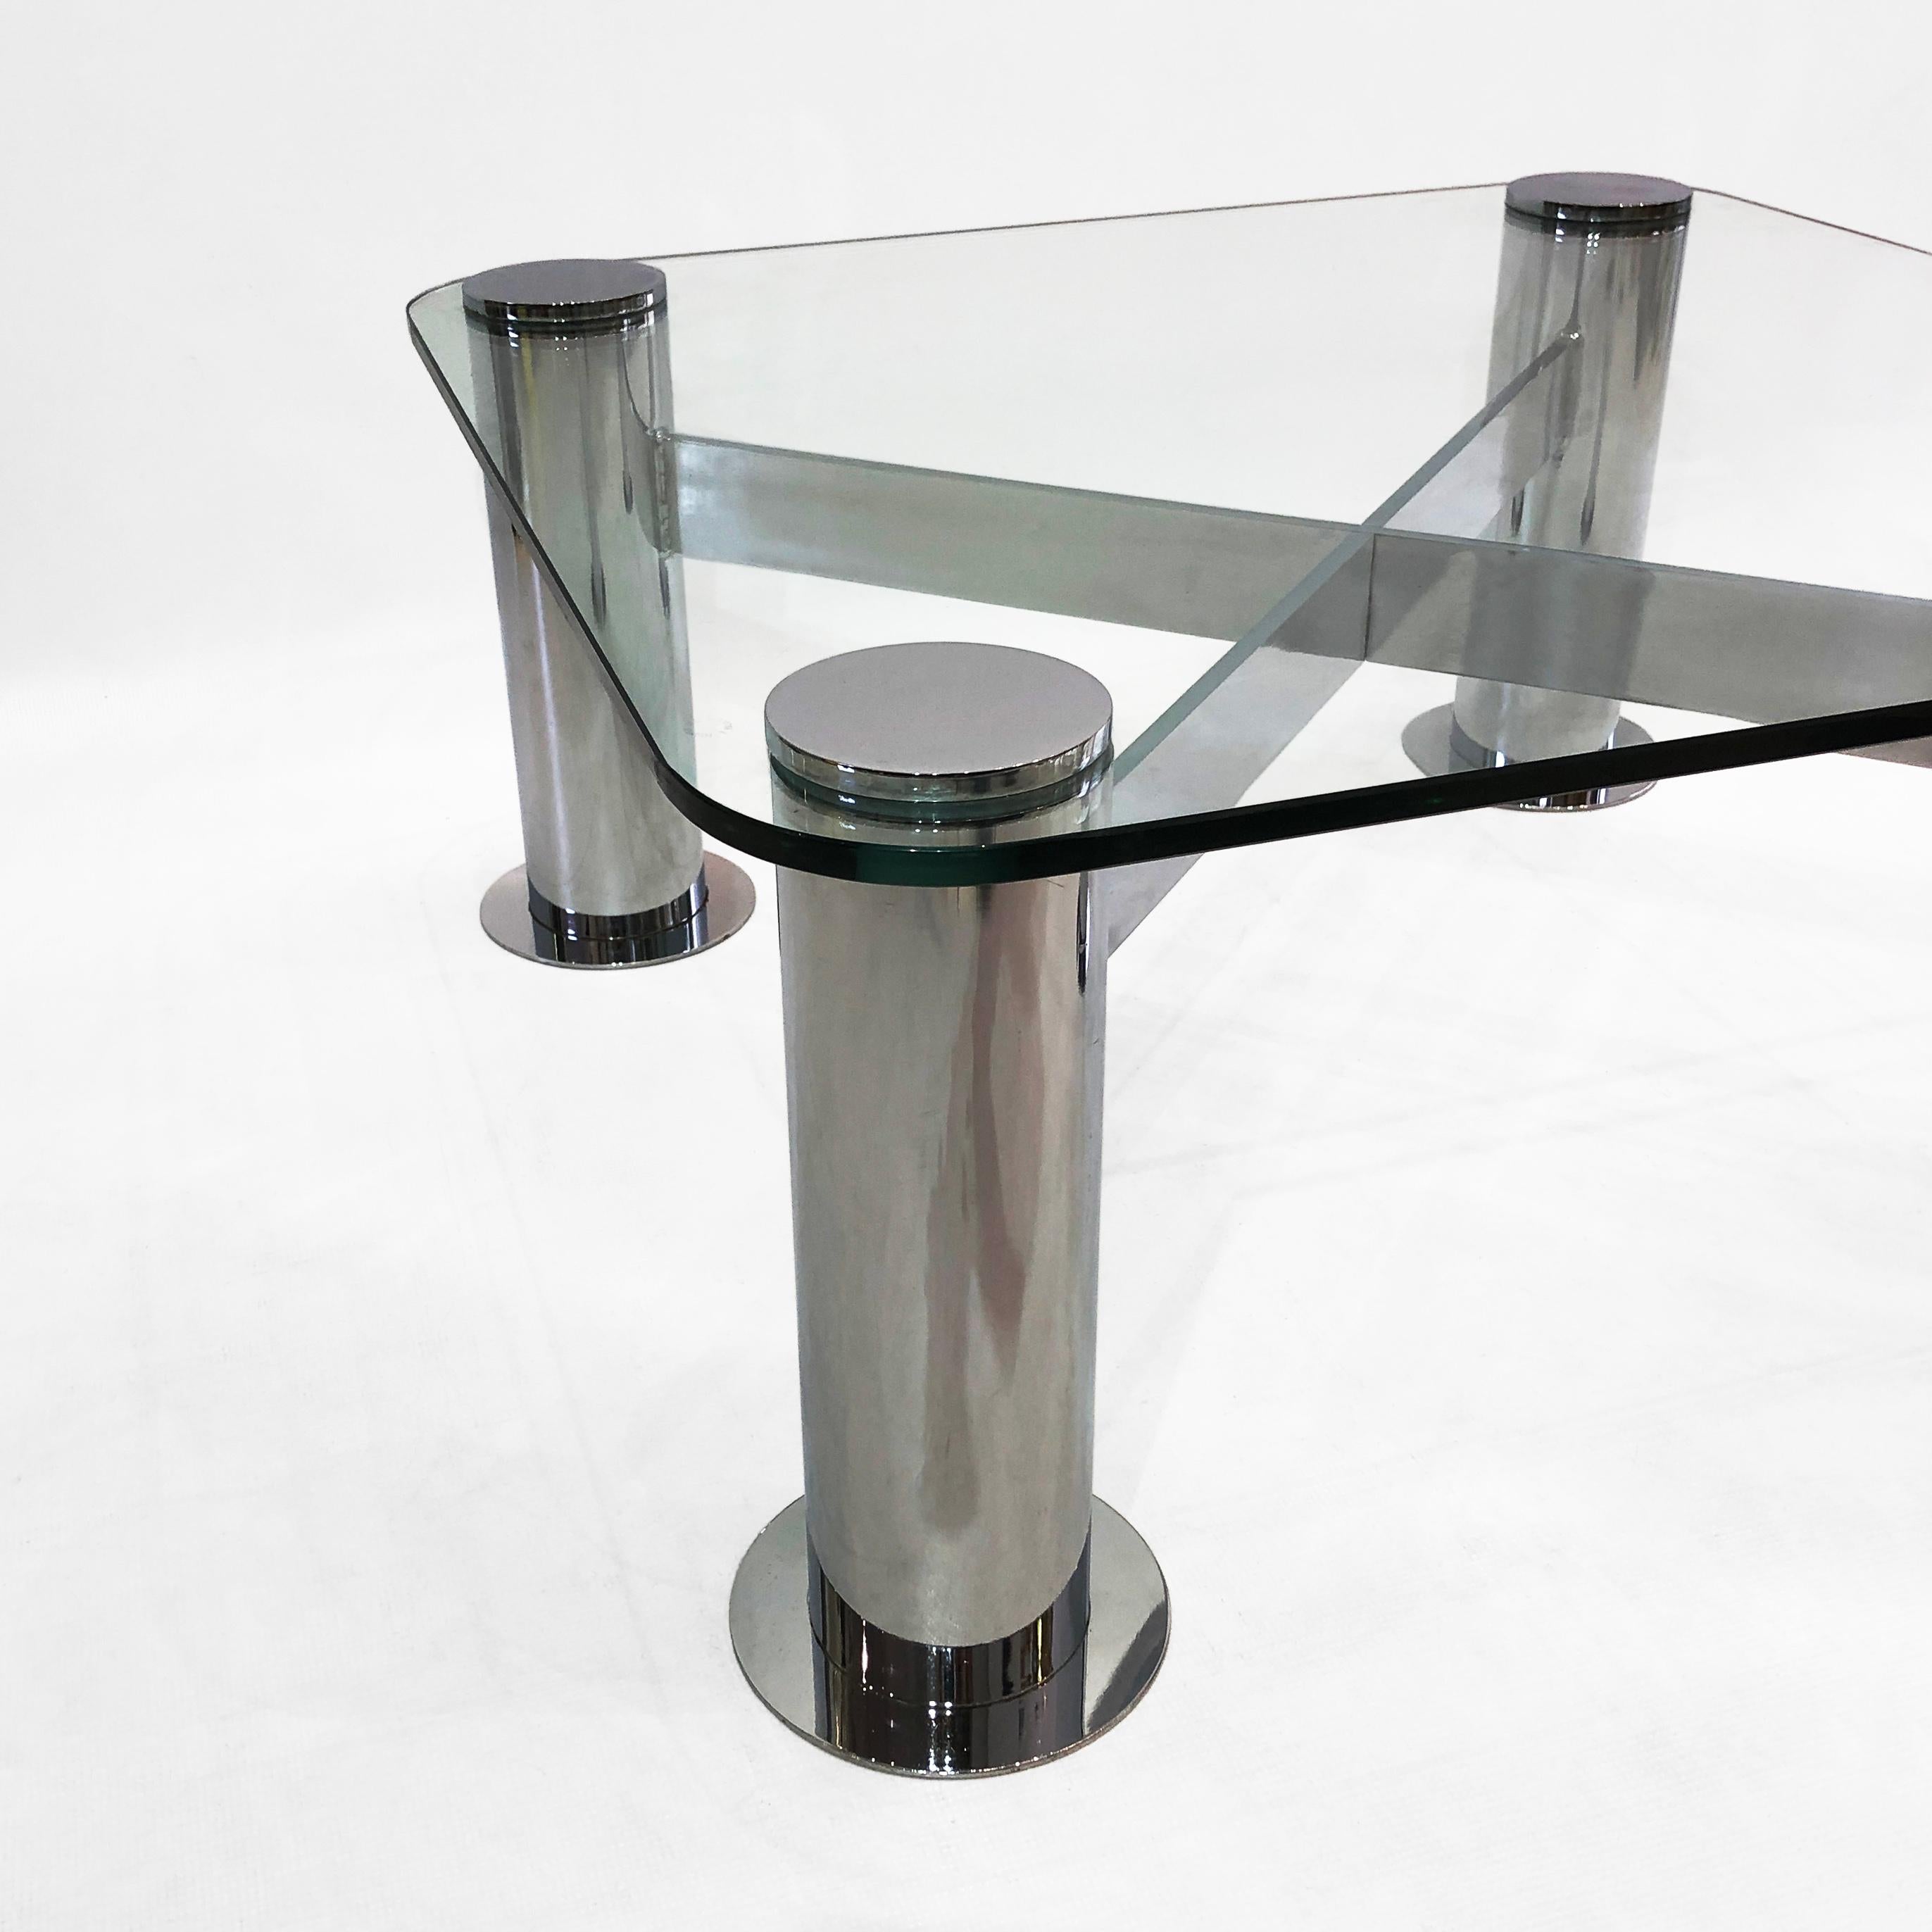 American Pace Postmodern Chrome Glass Coffee Table 1970s Vintage Retro Leon Rosen Style For Sale